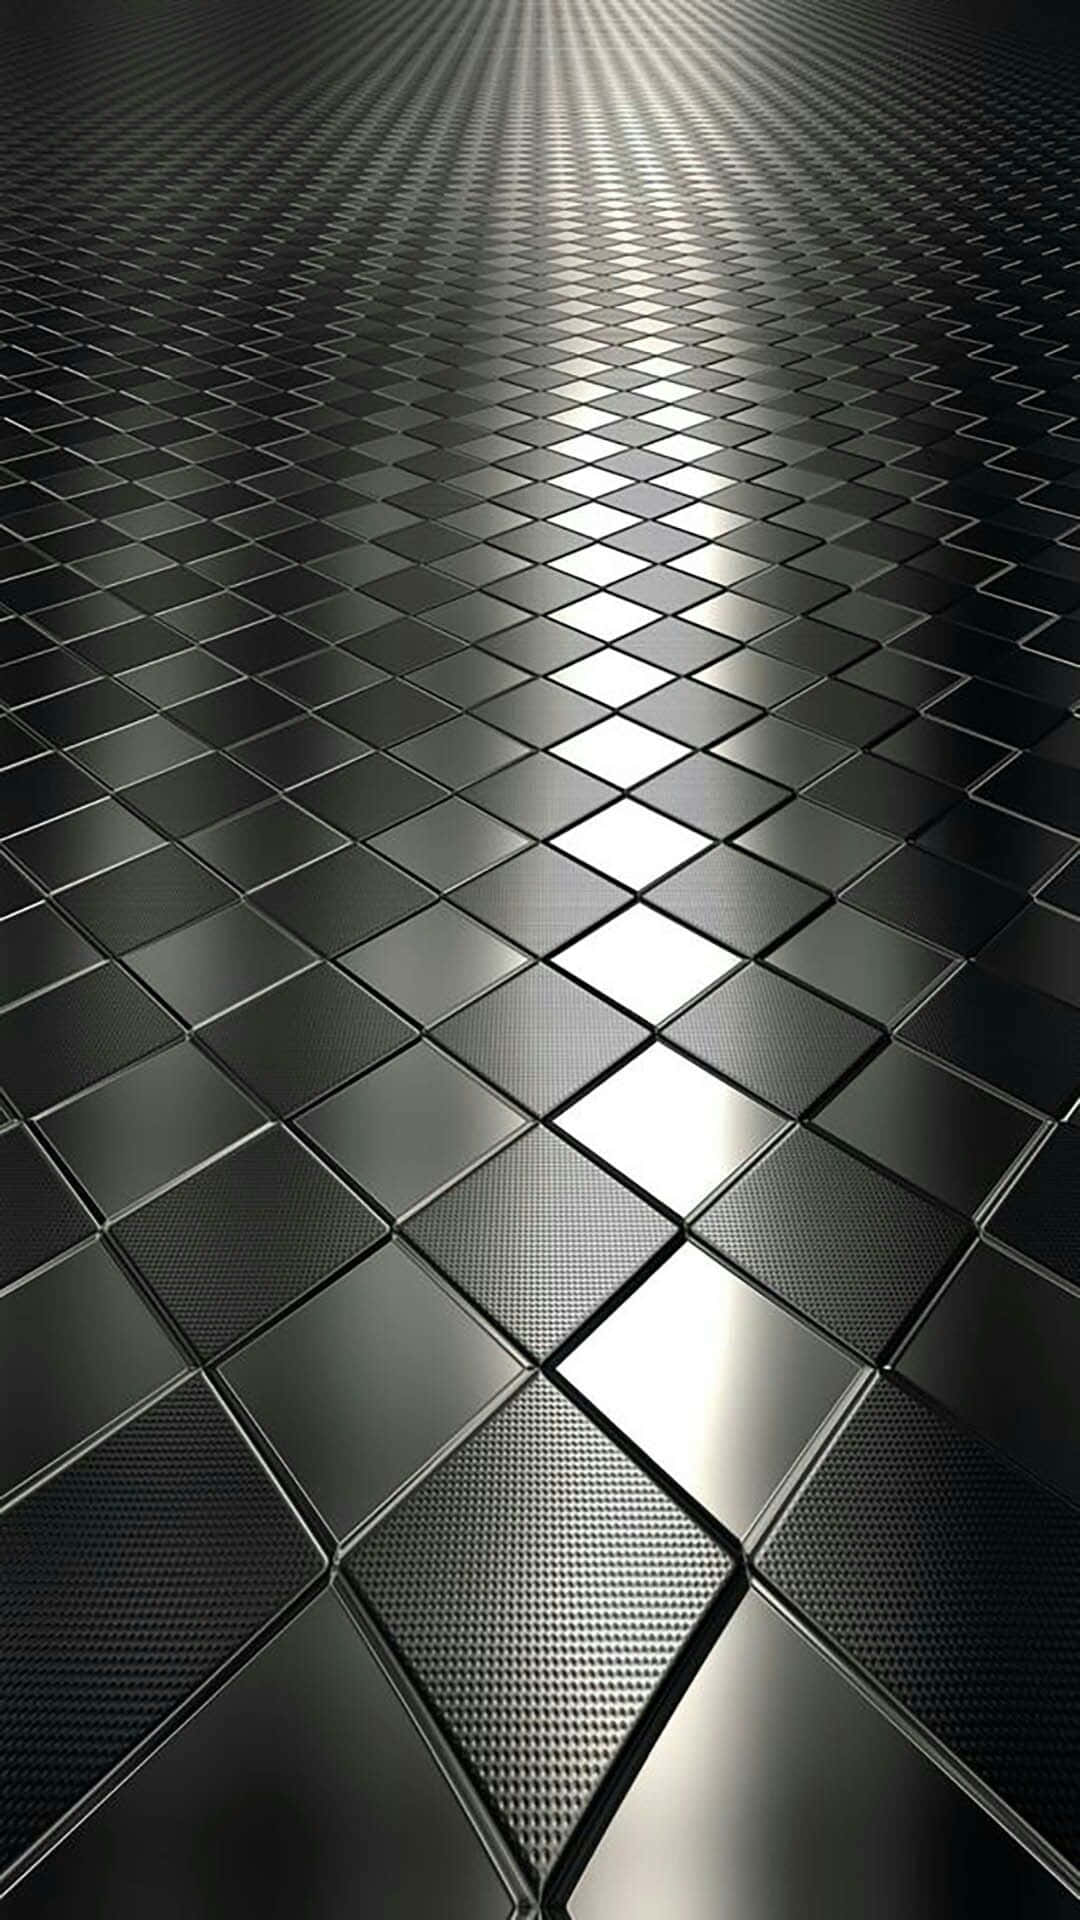 A Black And Silver Tiled Floor With A Sun Beam